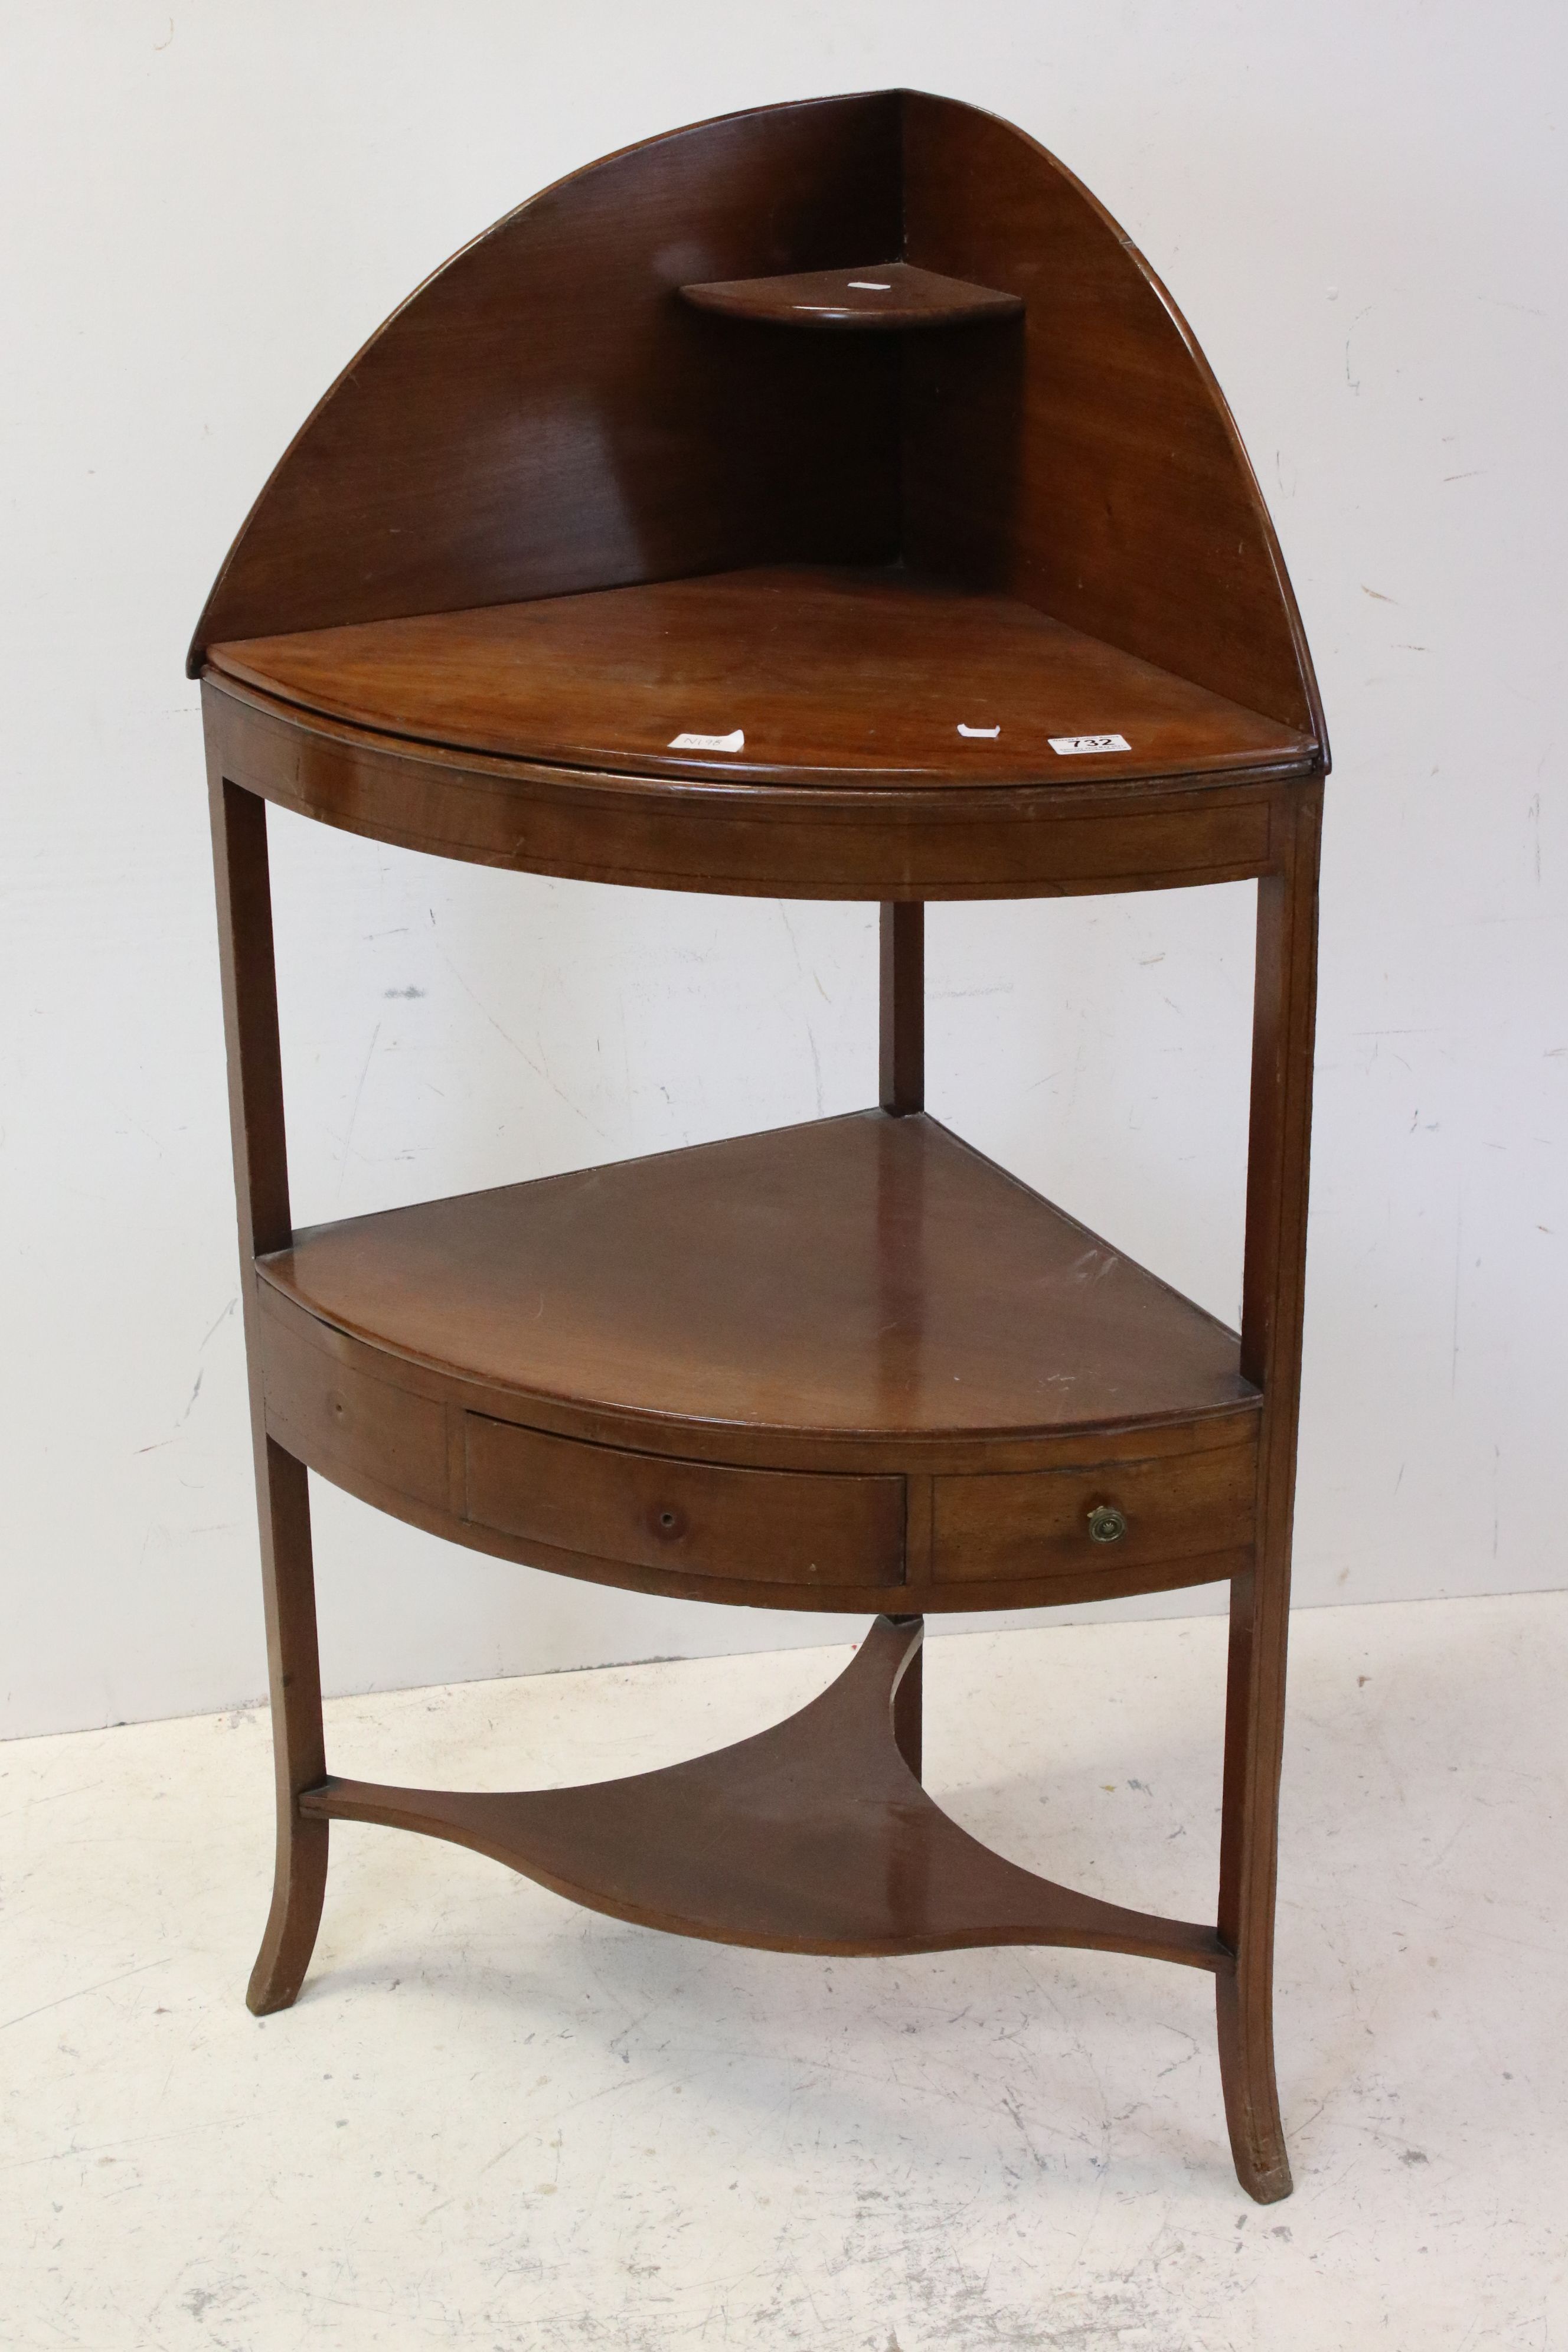 Early 19th century Mahogany Bow Fronted Corner Washstand, 115cms high